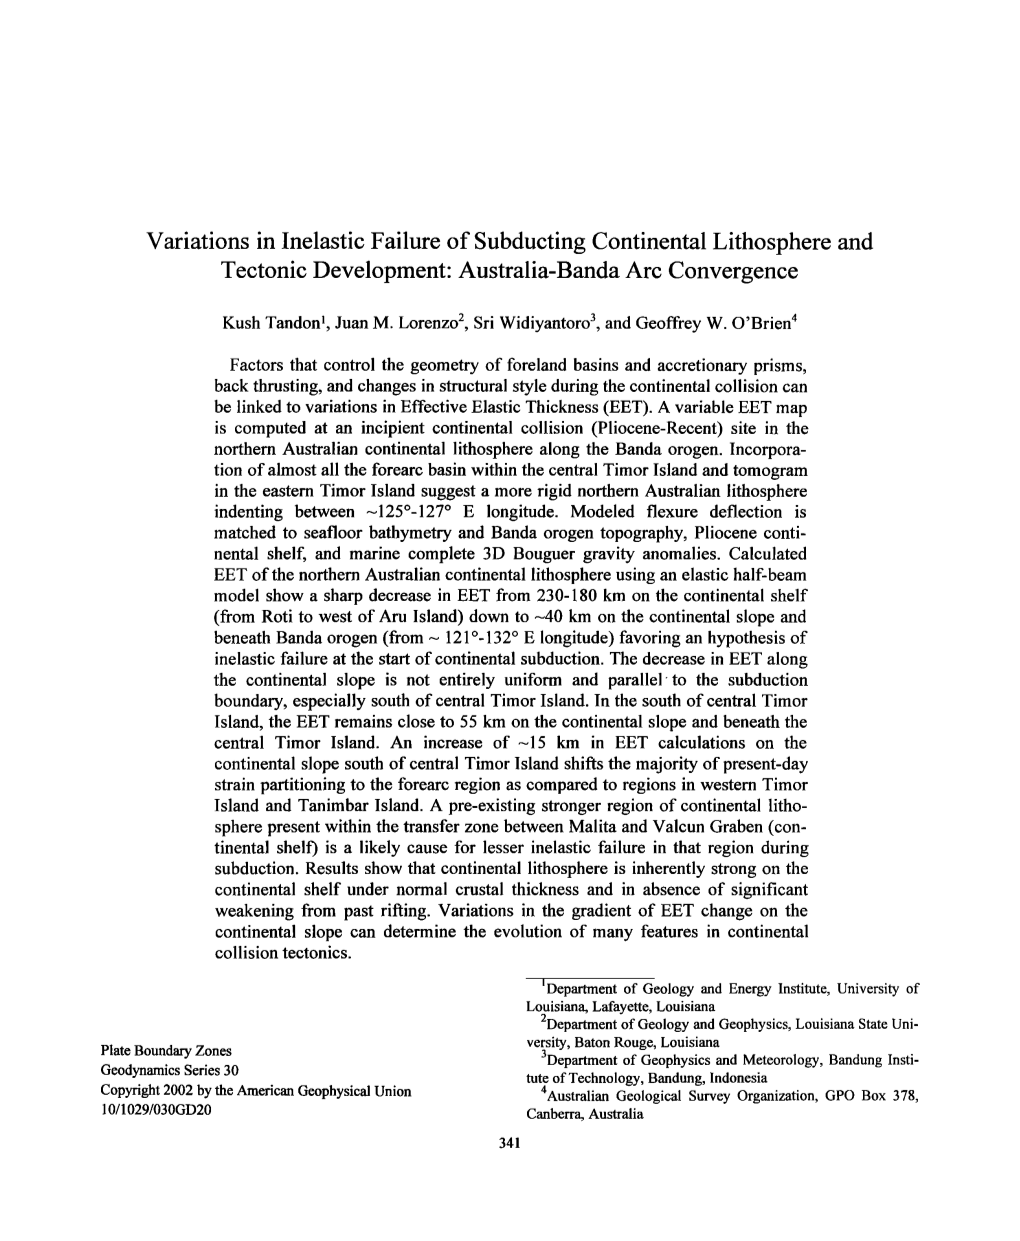 Variations in Inelastic Failure of Subducting Continental Lithosphere